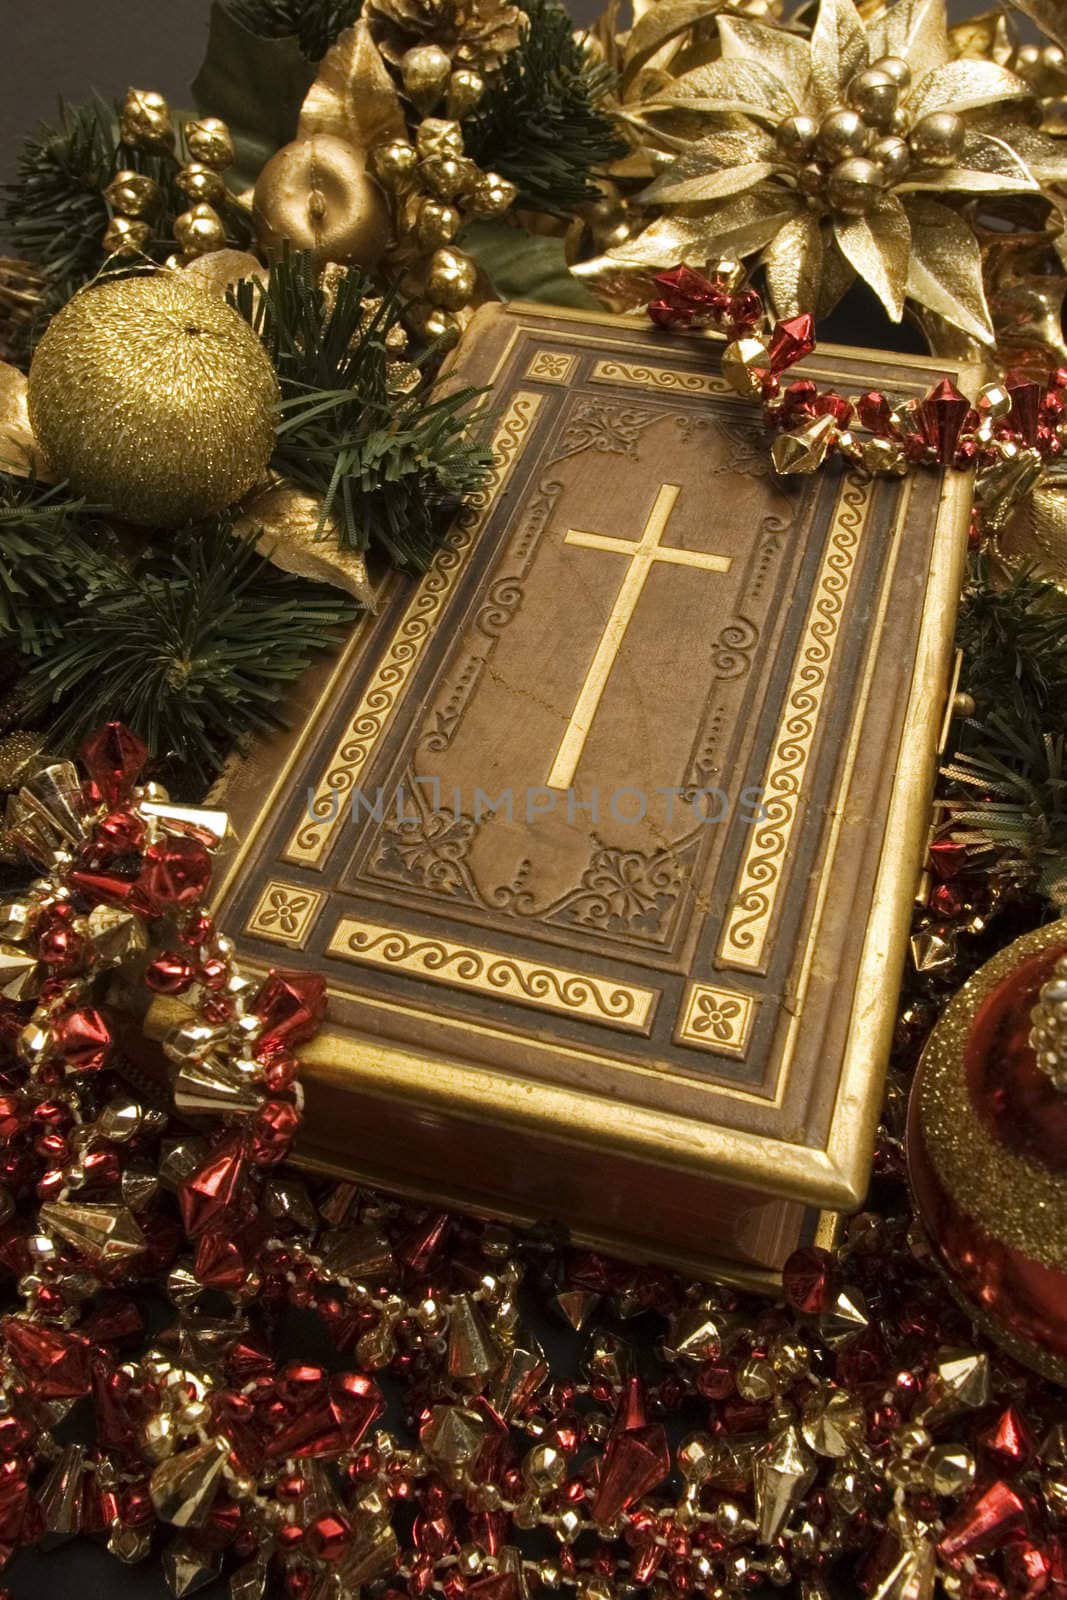 Bible with selective focus on the cross placed around Christmas ornaments.